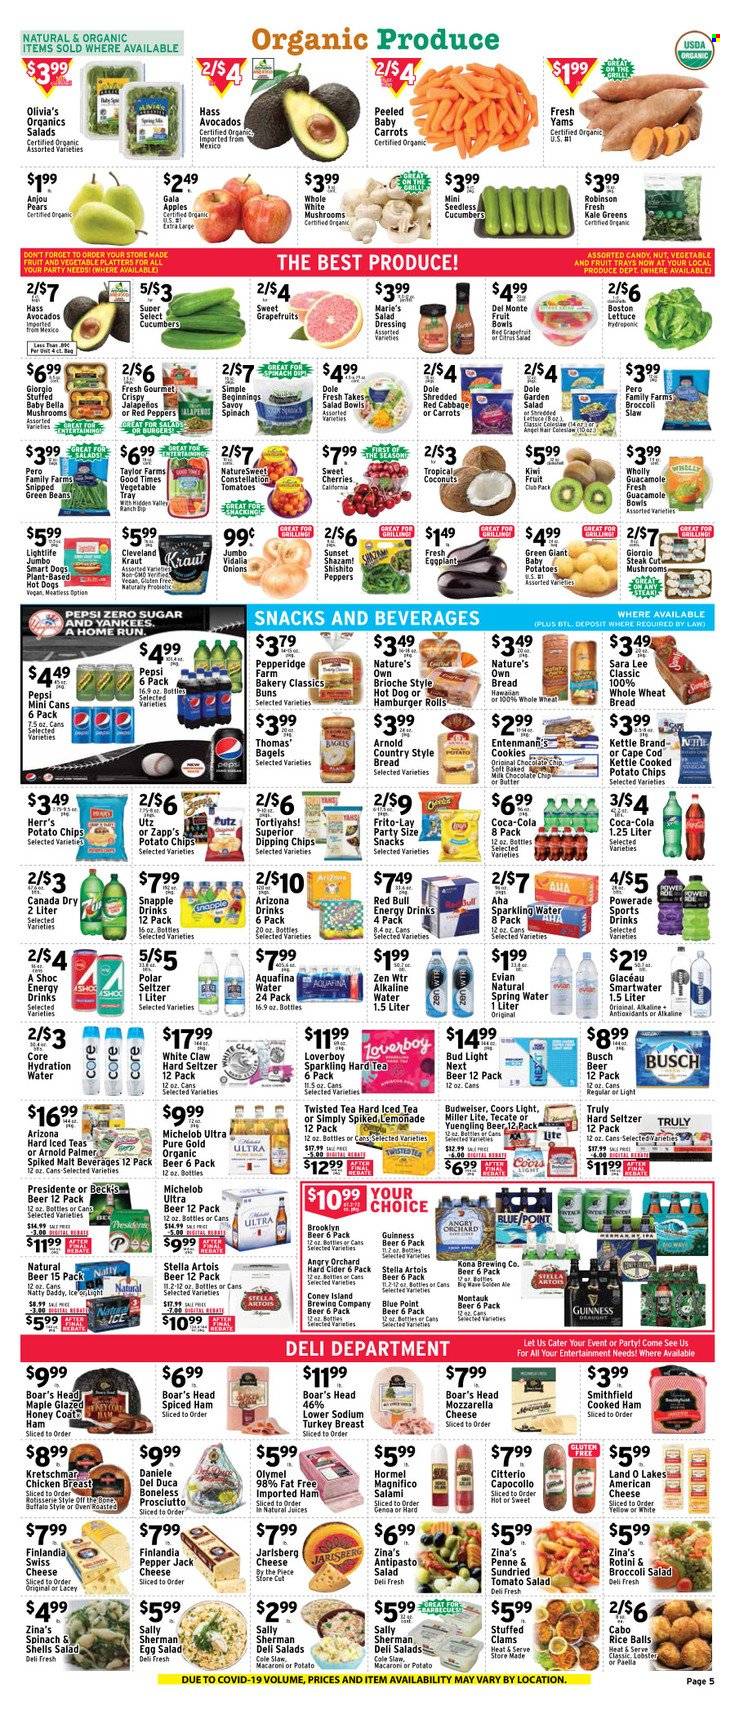 thumbnail - Met Foodmarkets Flyer - 05/28/2023 - 06/03/2023 - Sales products - mushrooms, bagels, wheat bread, buns, burger buns, brioche, Sara Lee, Entenmann's, beans, broccoli, carrots, cucumber, green beans, kale, onion, Dole, peppers, eggplant, red peppers, shredded lettuce, apples, Gala, grapefruits, kiwi, cherries, pears, coconut, fruit cup, clams, lobster, coleslaw, hot dog, macaroni, Hormel, Boar's Head, cooked ham, salami, ham, prosciutto, snack, guacamole, american cheese, mozzarella, swiss cheese, Pepper Jack cheese, cheese, dip, paella, rice balls, cookies, milk chocolate, chocolate chips, Candy, potato chips, chips, Frito-Lay, flour, malt, Del Monte, penne, salad dressing, dressing, honey, Canada Dry, lemonade, Powerade, Pepsi, juice, energy drink, ice tea, soft drink, Red Bull, AriZona, Snapple, Aquafina, spring water, sparkling water, Smartwater, alkaline water, Evian, water, alcohol, White Claw, Hard Seltzer, TRULY, cider, Busch, Stella Artois, Bud Light, Guinness, IPA, turkey breast, chicken breasts, chicken, turkey, steak, Brooklyn Beer, Budweiser, Miller Lite, Coors, Twisted Tea, Yuengling, Michelob. Page 5.